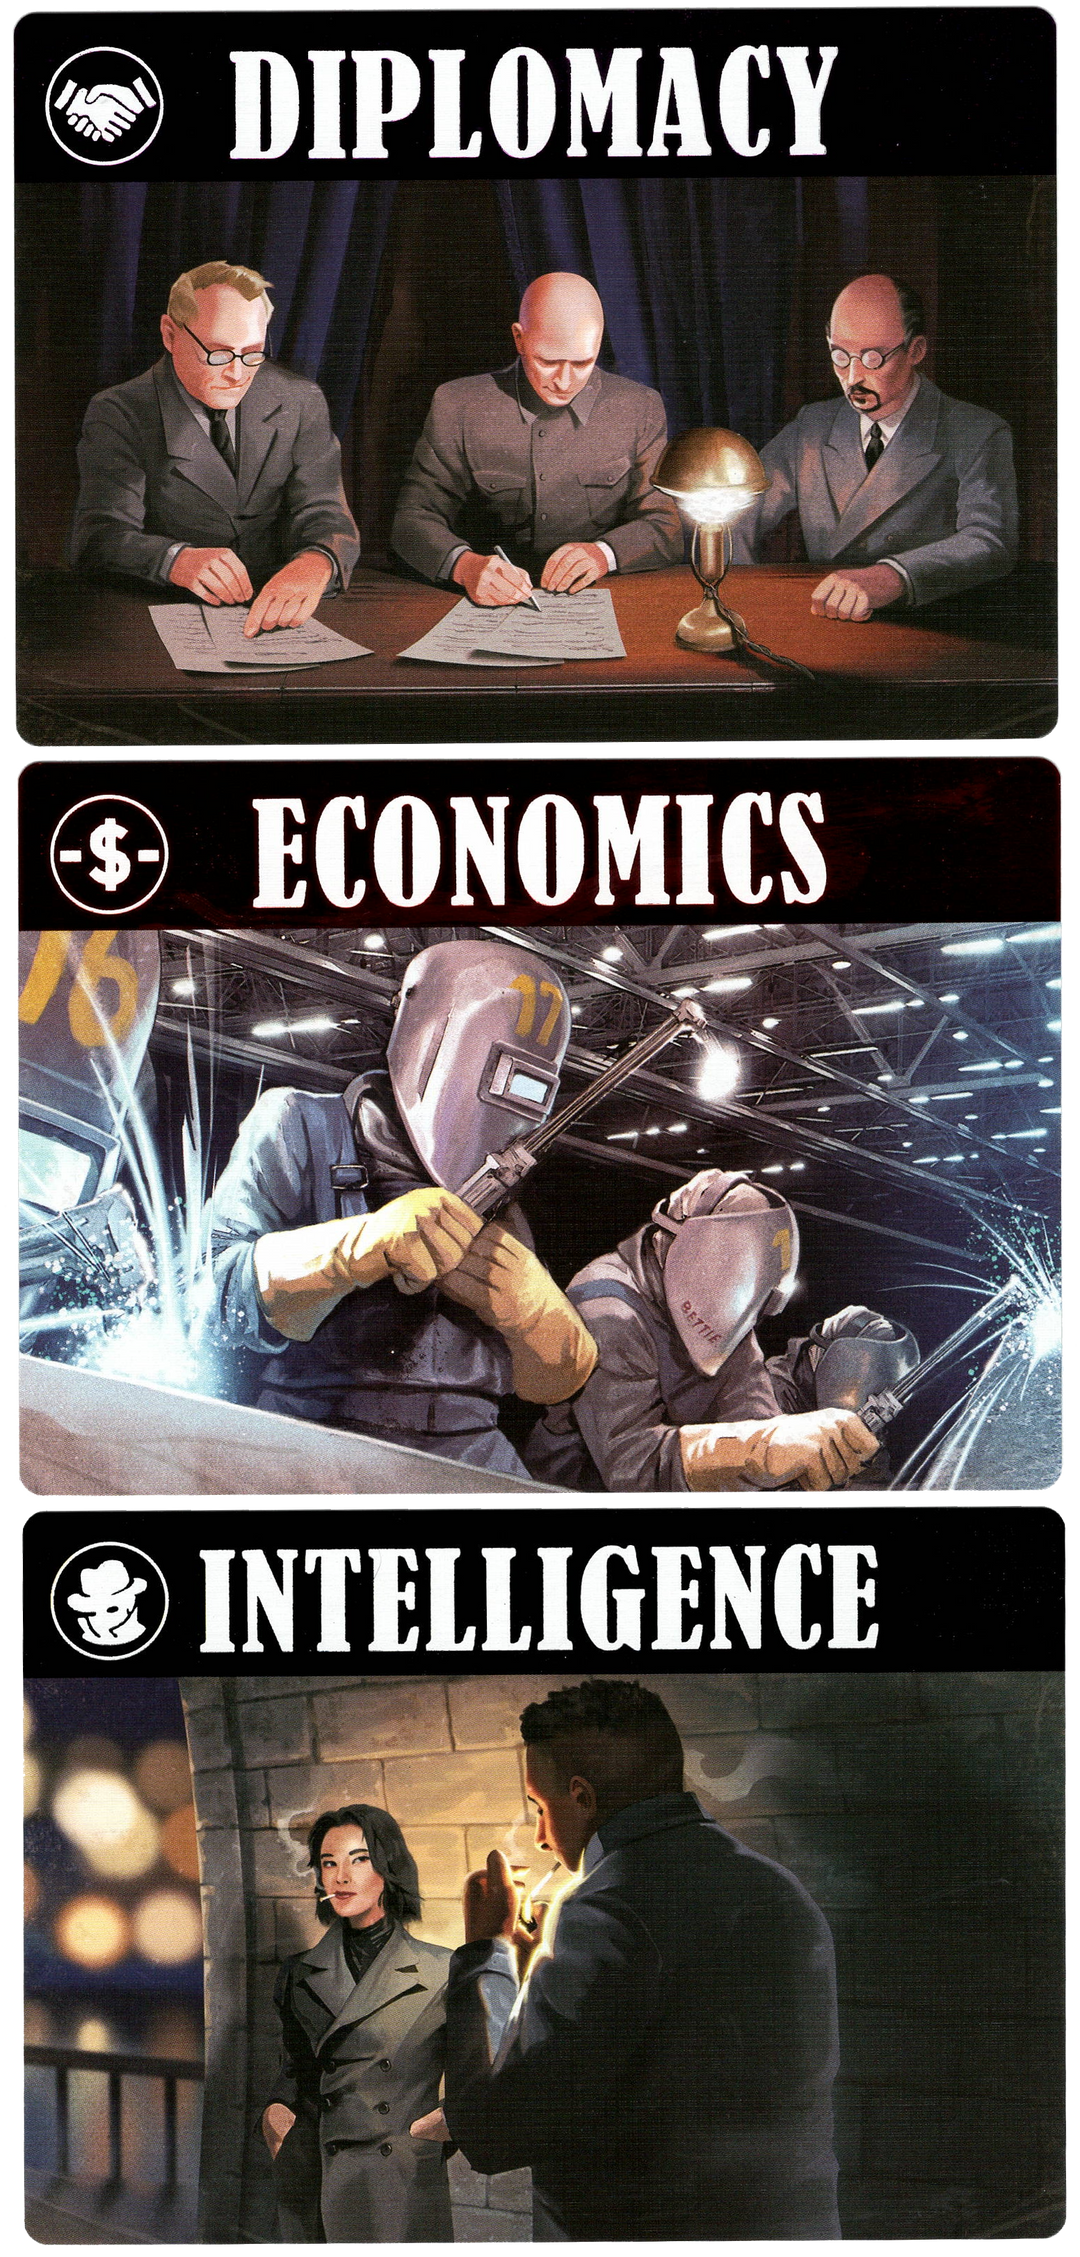 A set of three cards for use with the board game Air Land and Sea: Spies Lies and Supplies. Each card has a large text banner at the top and an illustration below it. The first card reads "Diplomacy" at the top and and shows three men writing at a table below. The second card reads "Economics" at the top and shows two people with helmets and blow torches below. The third card reads "Intelligence" at the top and shows a man and a woman talking outside by a brick wall.